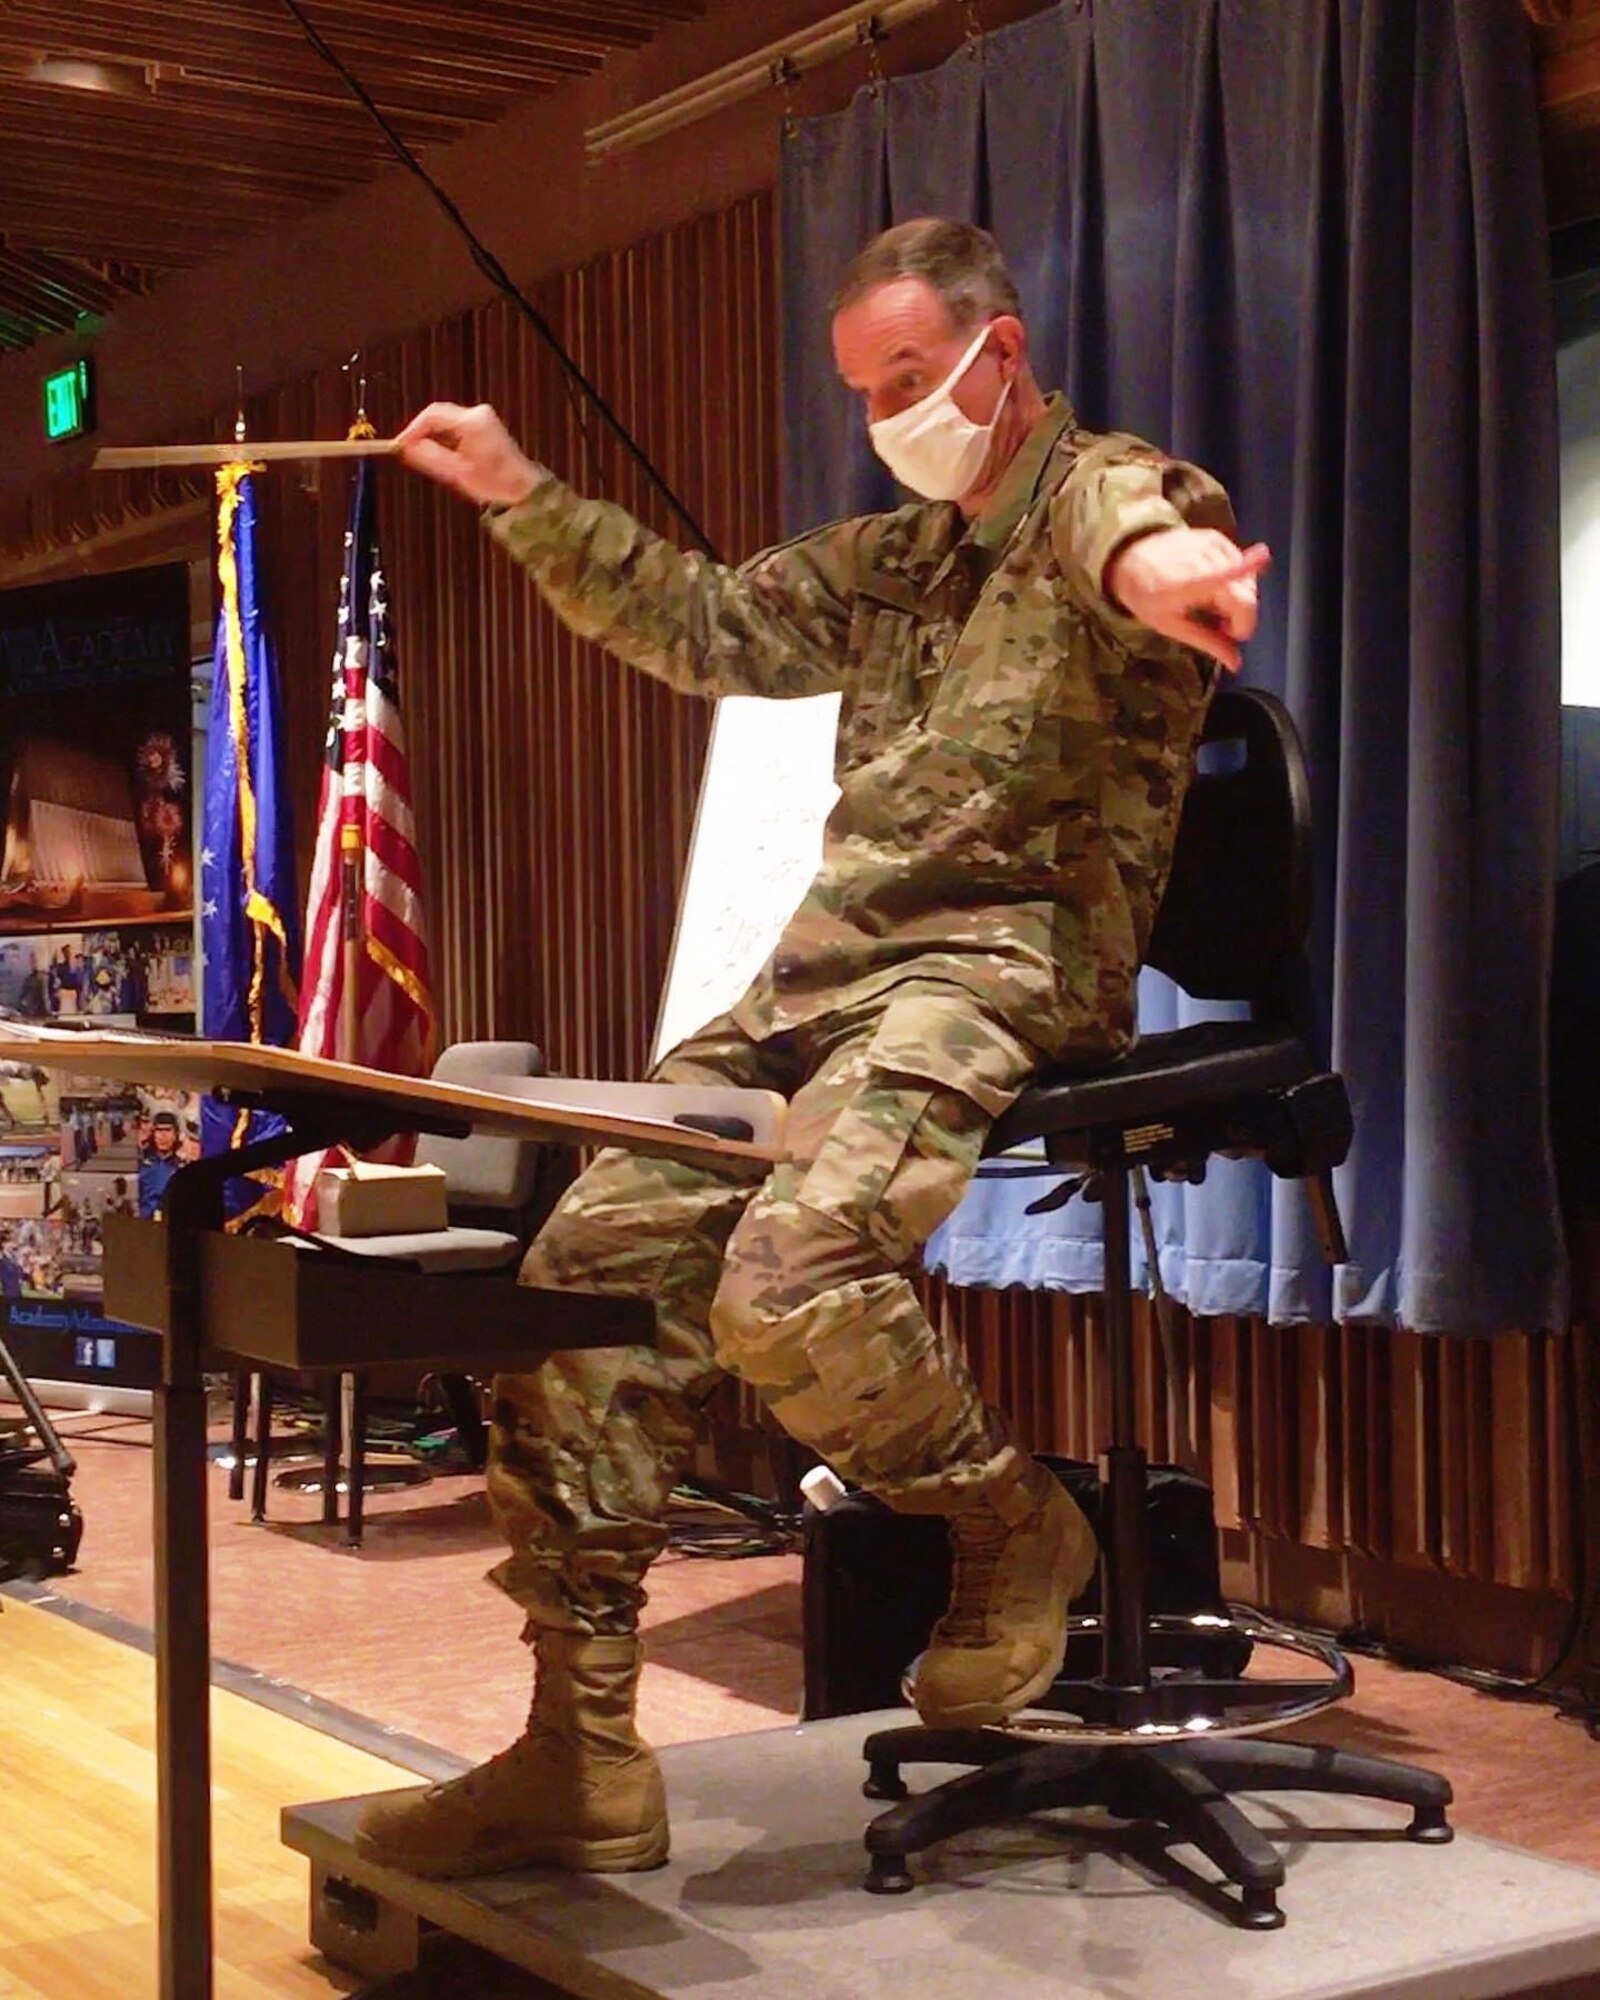 Lt Col Michael Willen conducts a socially distanced Academy Band  rehearsal for our 2020 Holly and Ivy program.  He is dressed in dark green OCP uniform, wearing a white facial mask in front of a blue curtain backdrop as well as the American and Air Force flags. This full concert is available for all to watch for free at https://www.youtube.com/watch?v=QT8FHeZmy8U, or click on this image to be taken right to it!.